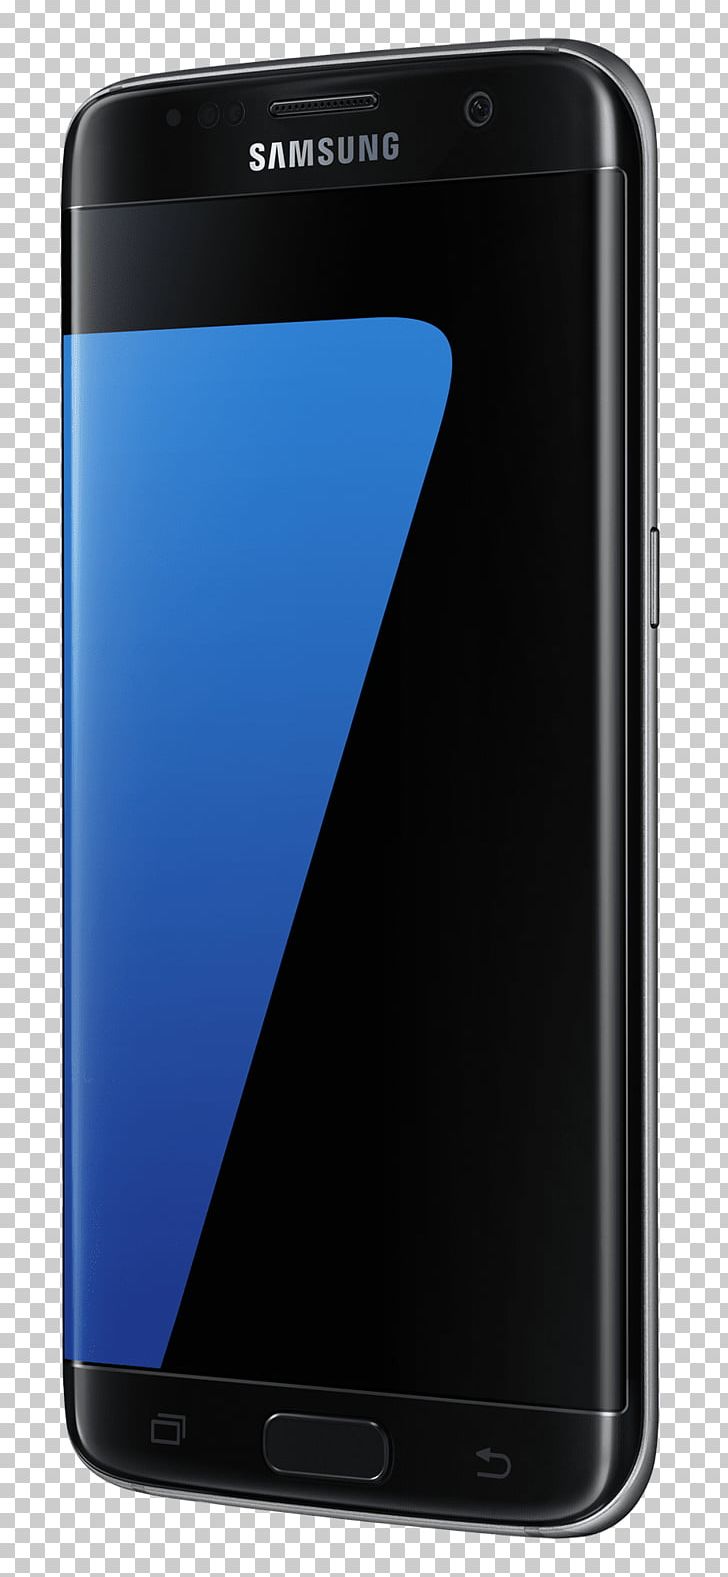 Samsung GALAXY S7 Edge Samsung Galaxy S9 Samsung Galaxy S6 Android PNG, Clipart, Electronic Device, Gadget, Mobi, Mobile Phone, Mobile Phones Free PNG Download